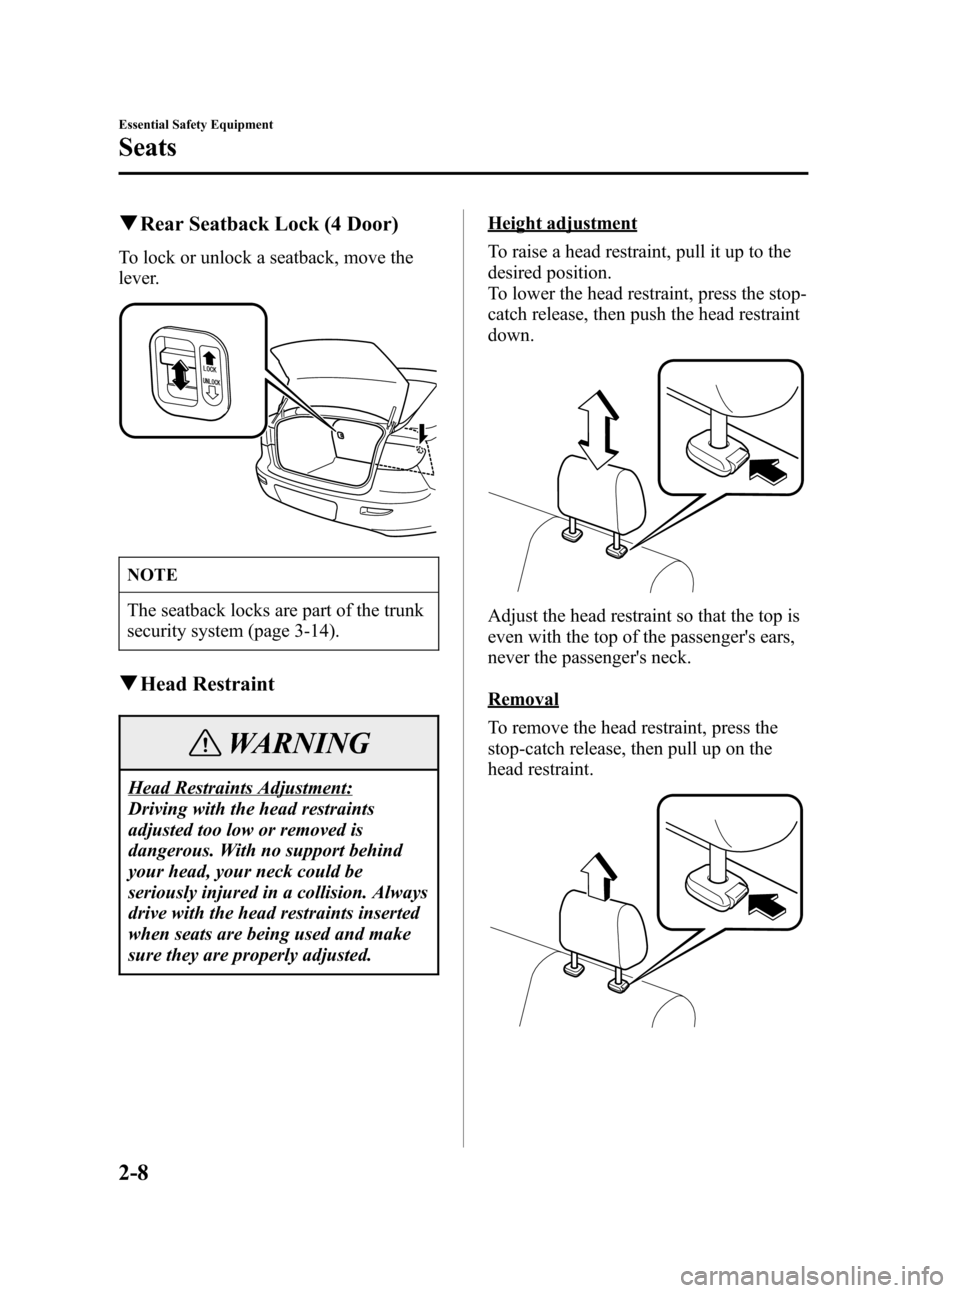 MAZDA MODEL 3 HATCHBACK 2006  Owners Manual (in English) Black plate (22,1)
qRear Seatback Lock (4 Door)
To lock or unlock a seatback, move the
lever.
NOTE
The seatback locks are part of the trunk
security system (page 3-14).
qHead Restraint
WARNING
Head Re